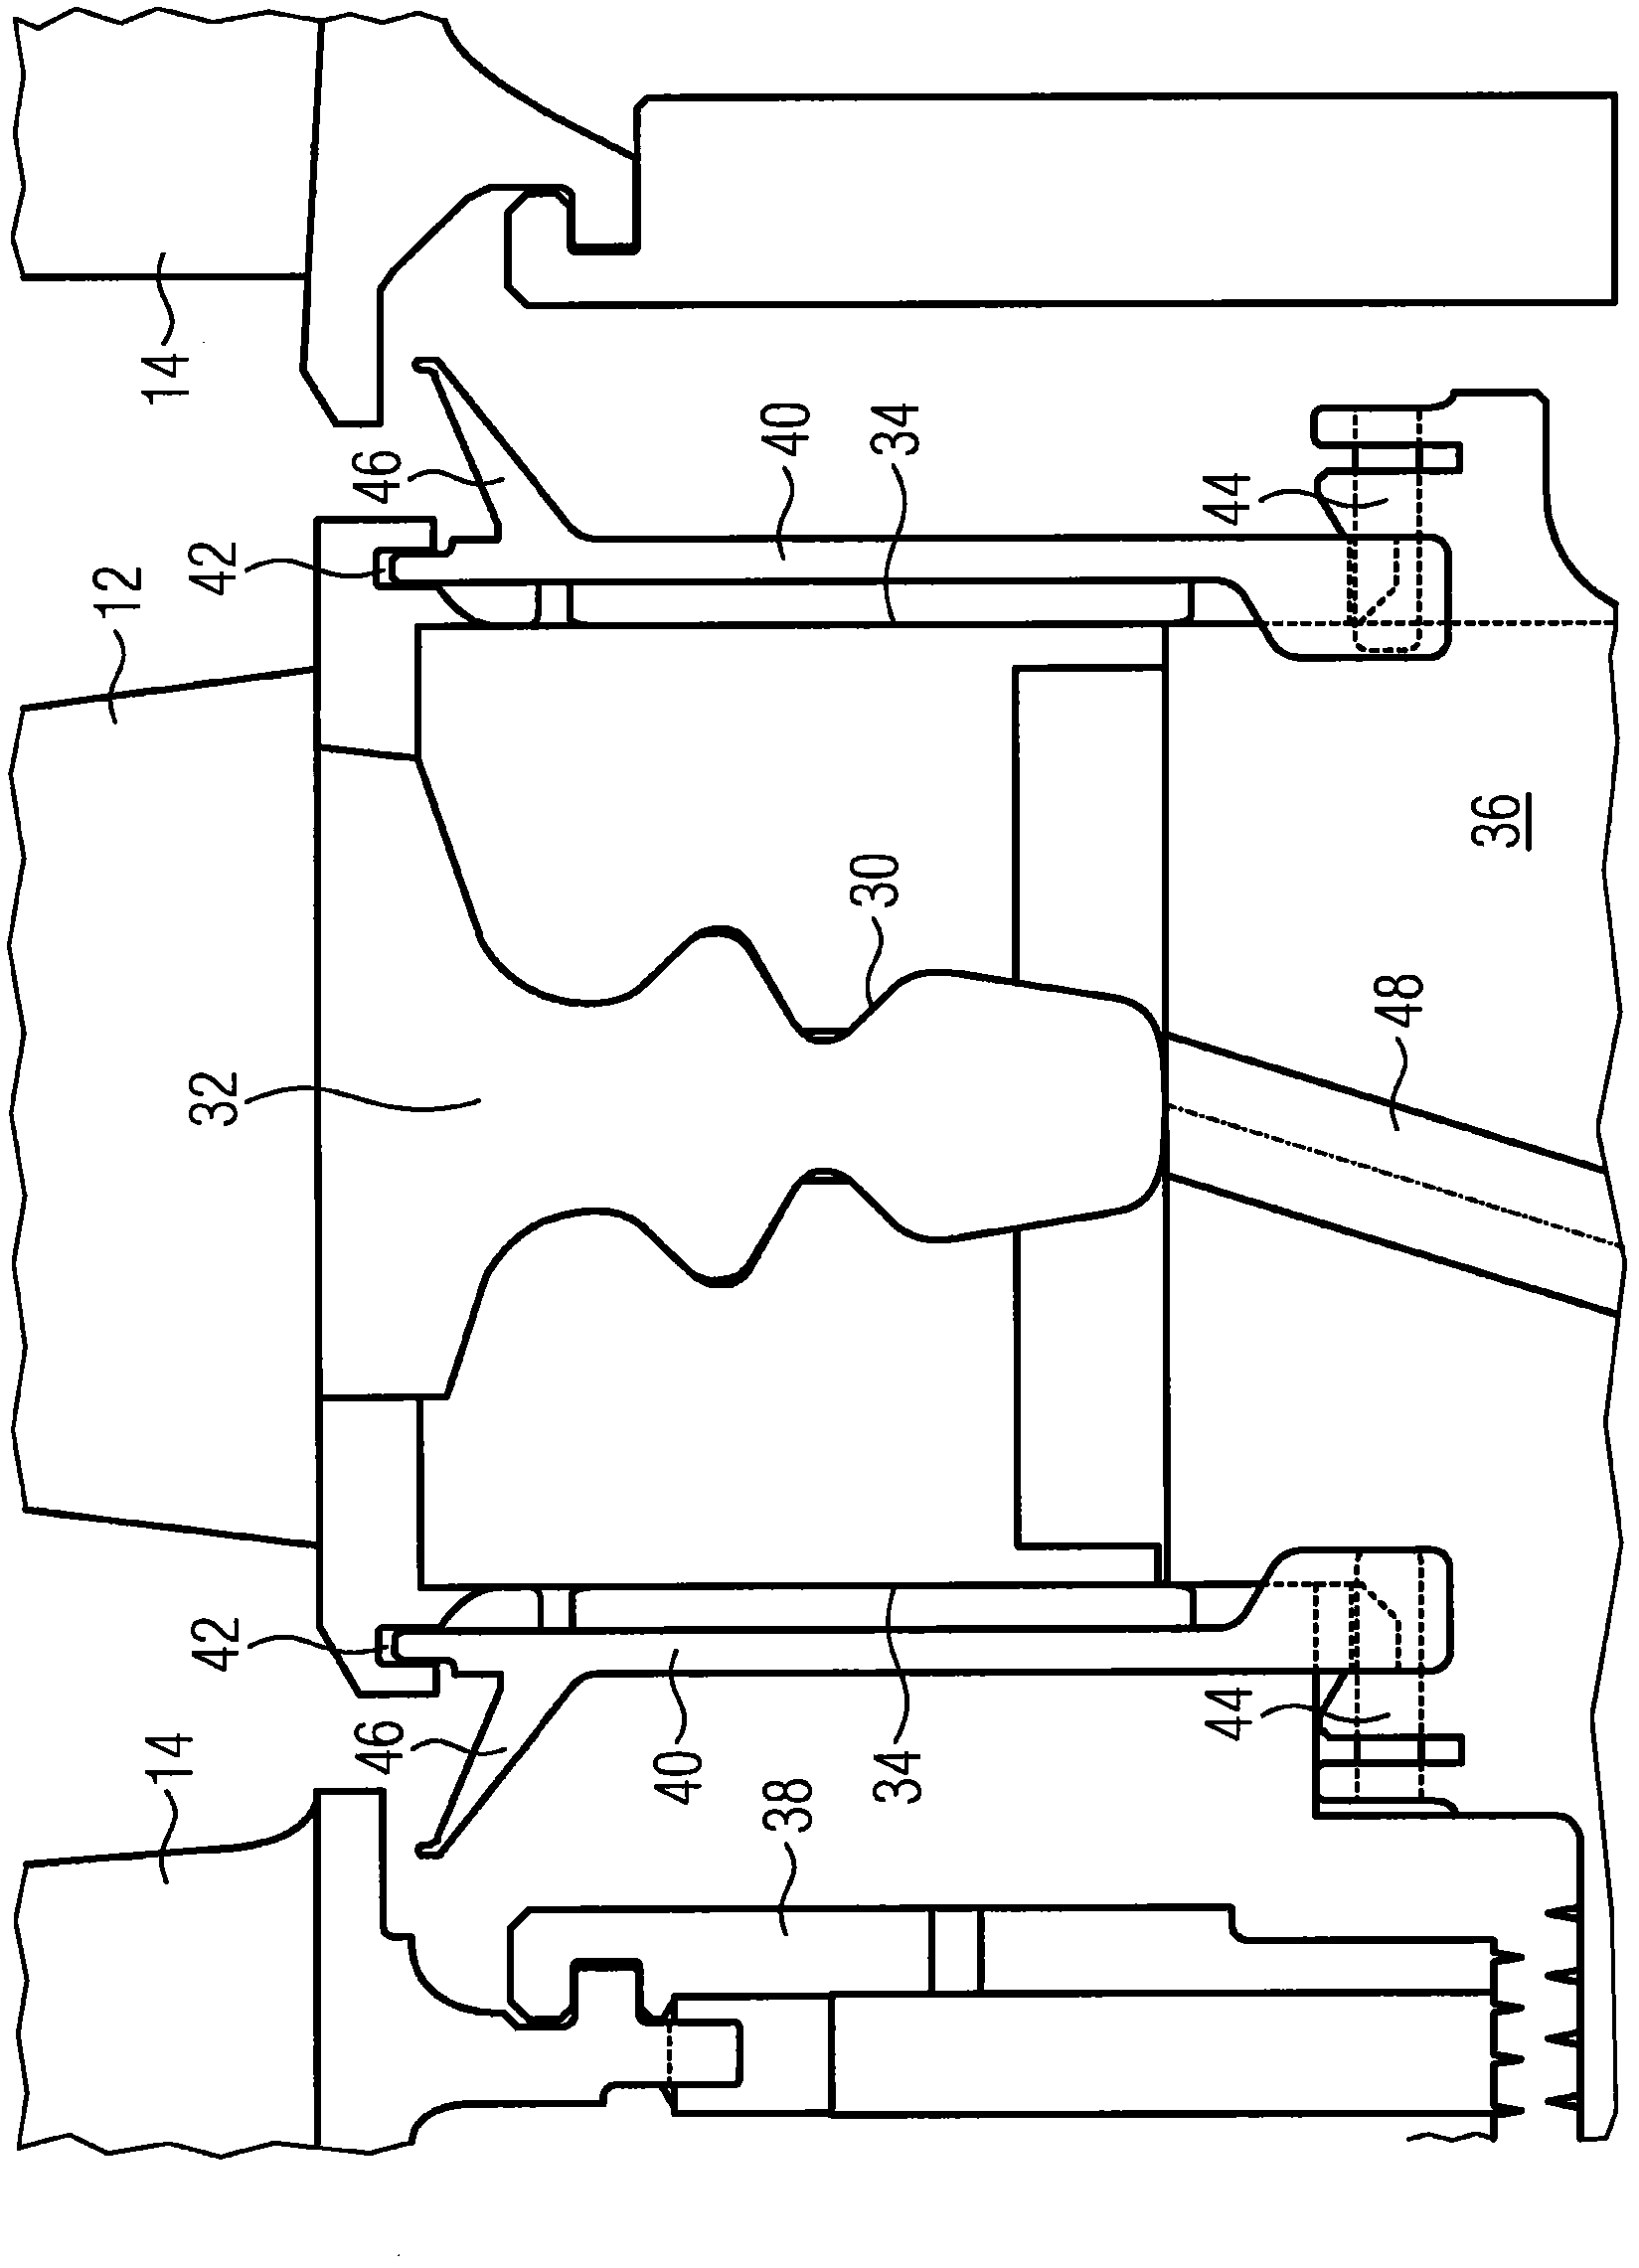 Gas turbine with securing plate between blade base and disk